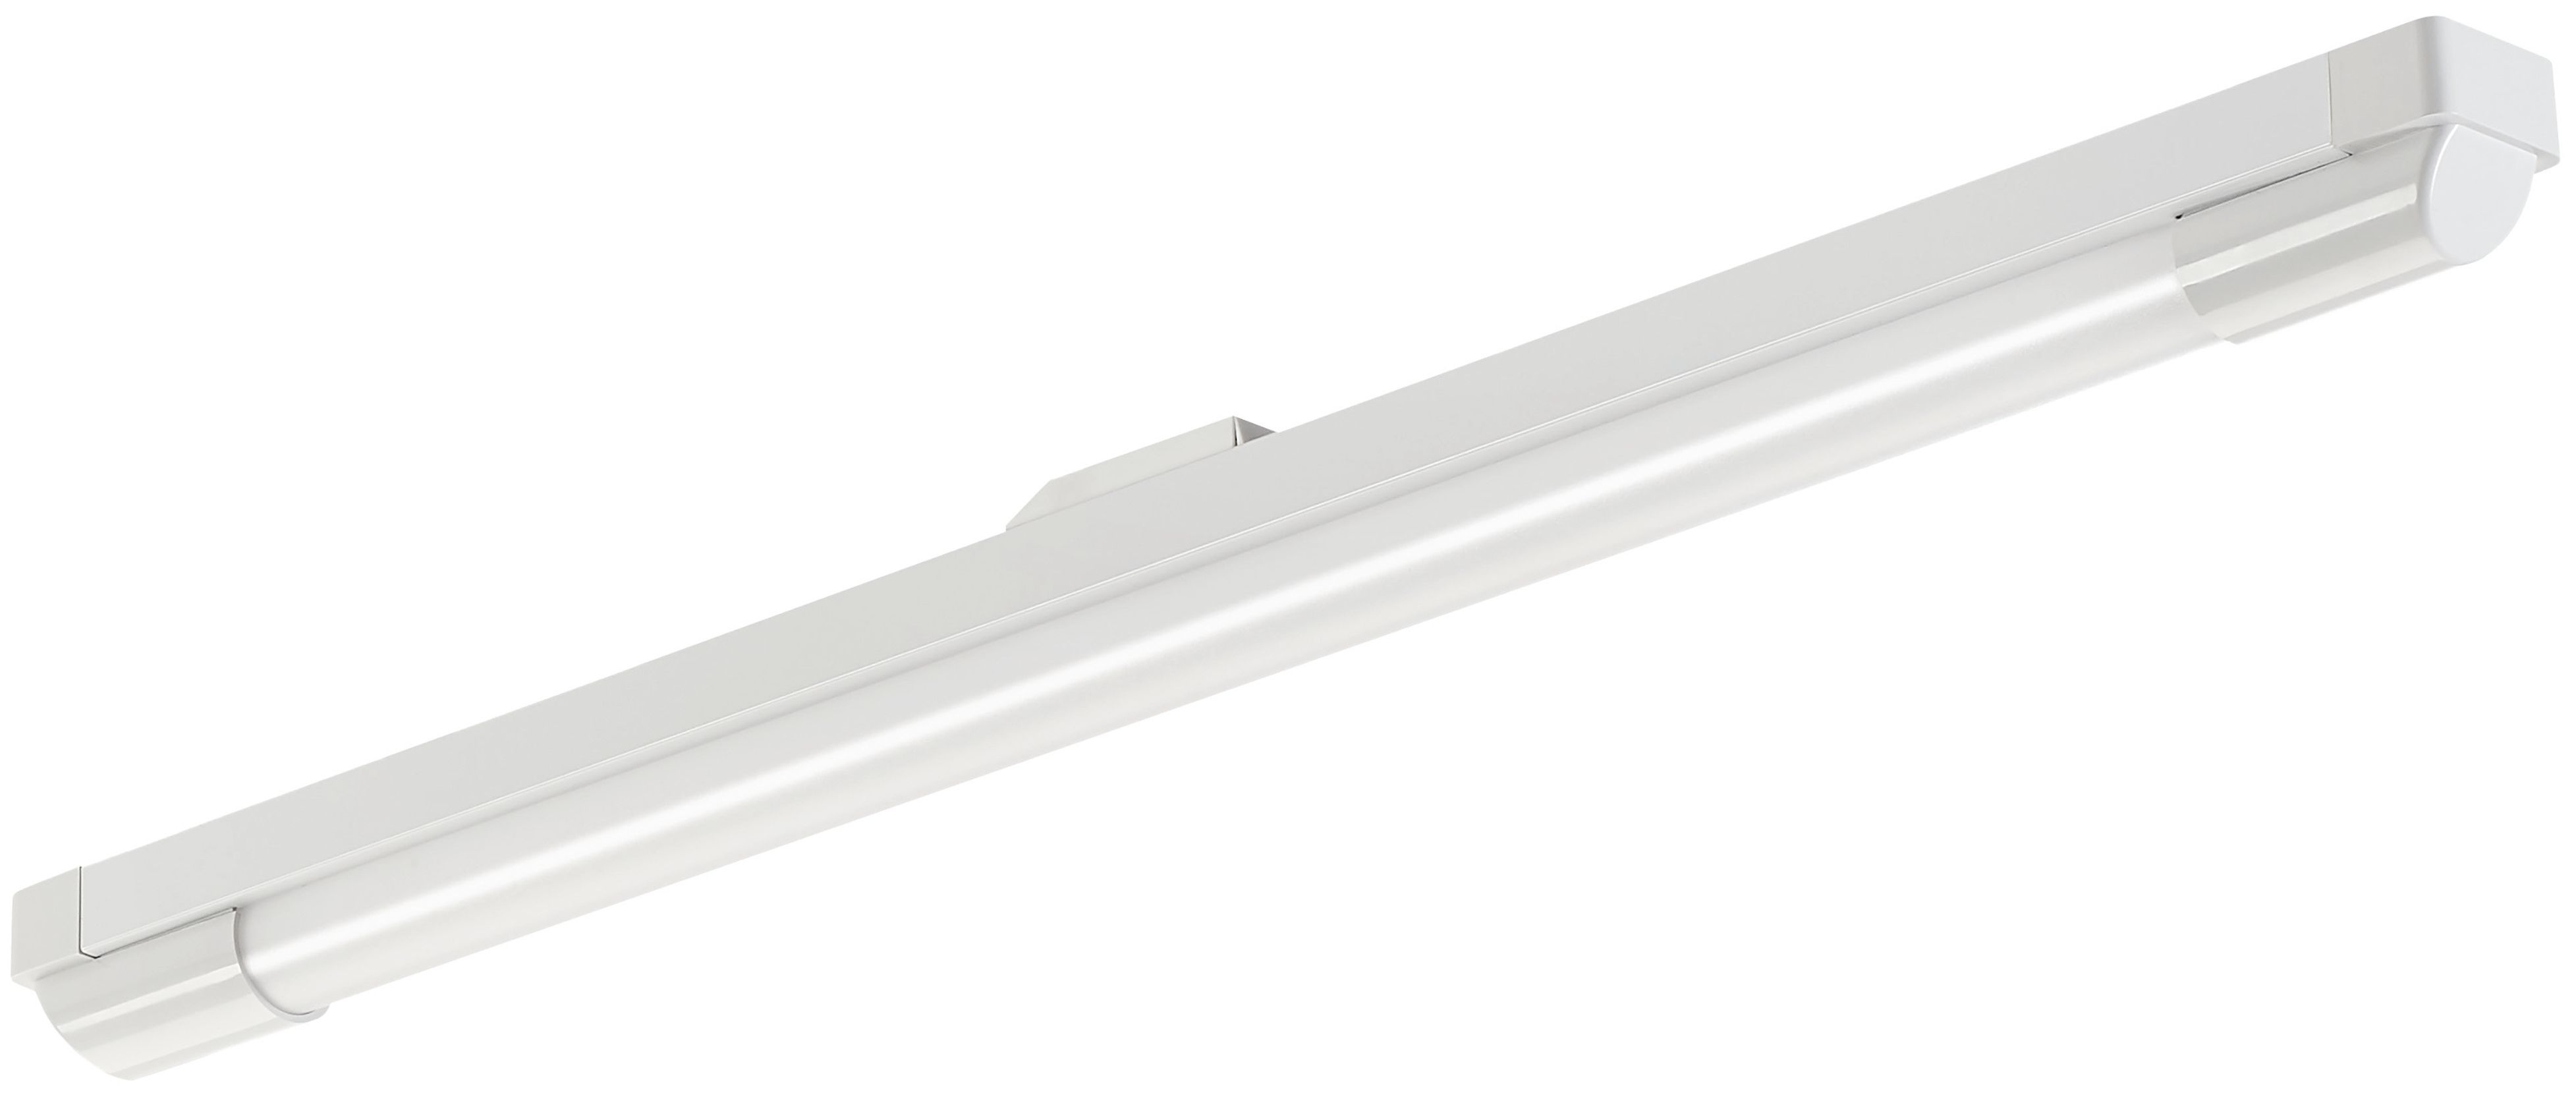 Sylvania Single 2ft IP20 Light Fitting with T8 Integrated LED Tube - 8W